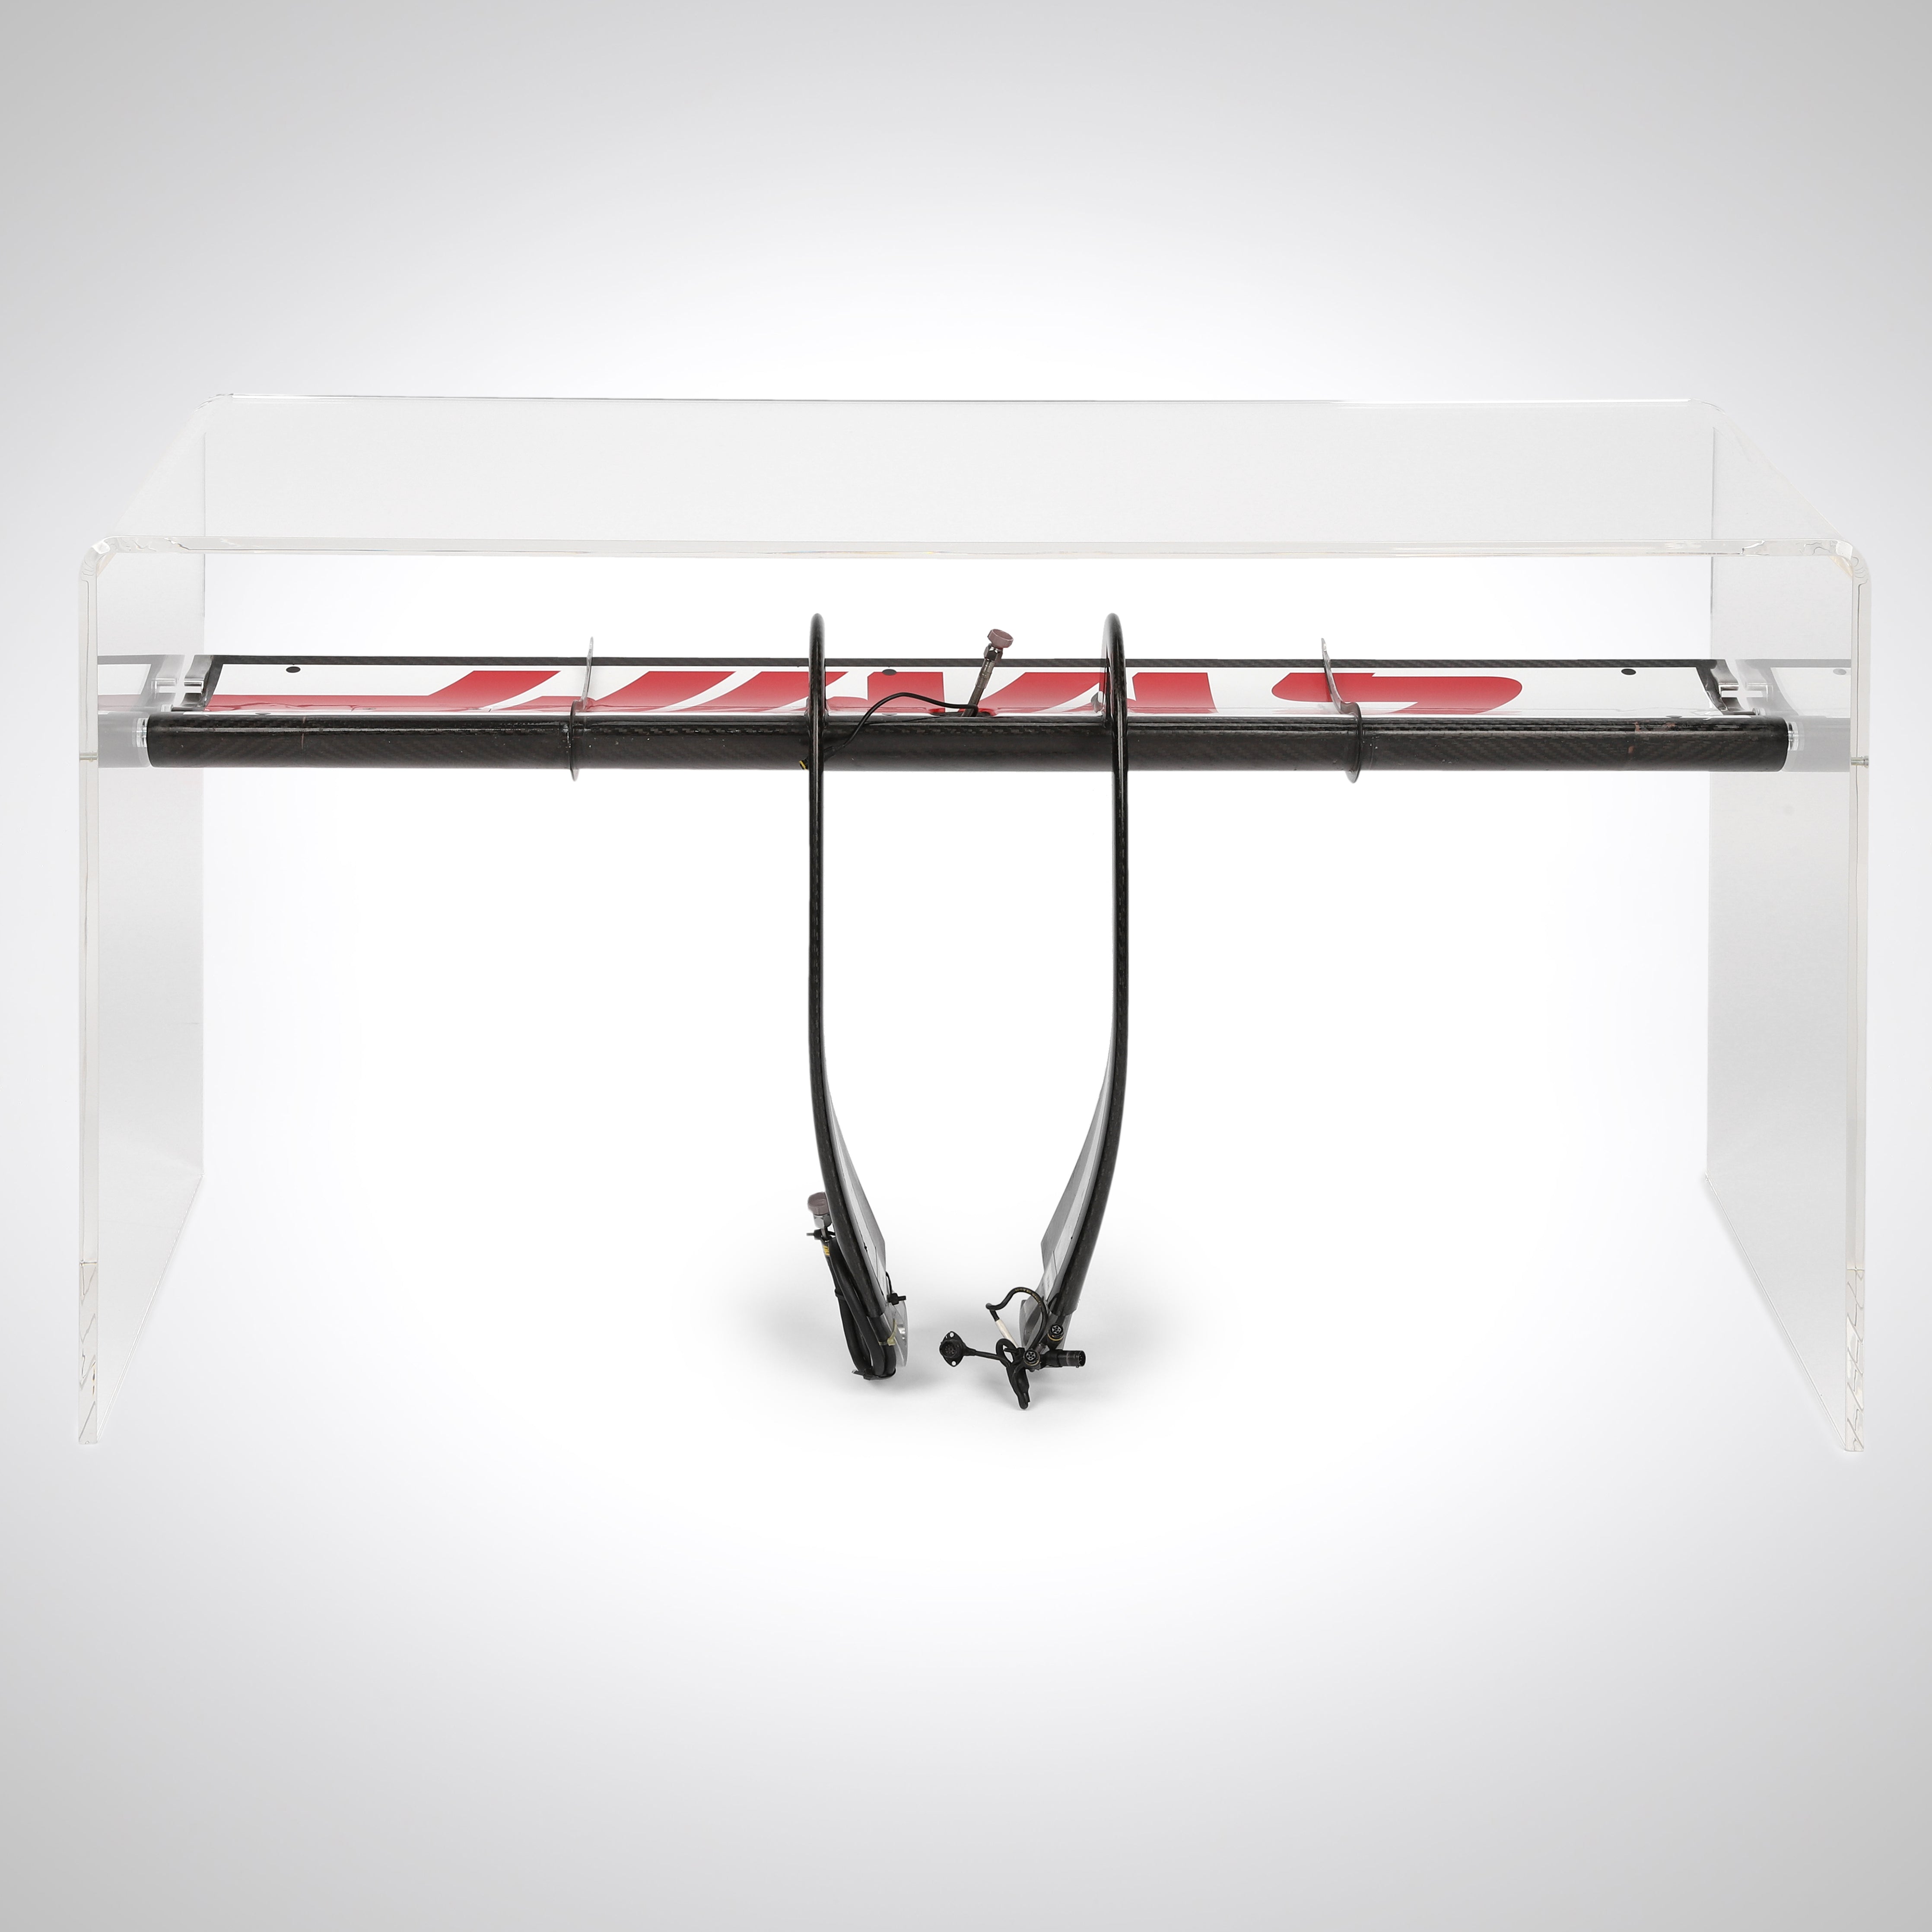 Haas F1 Team 2020 Rear Wing Table